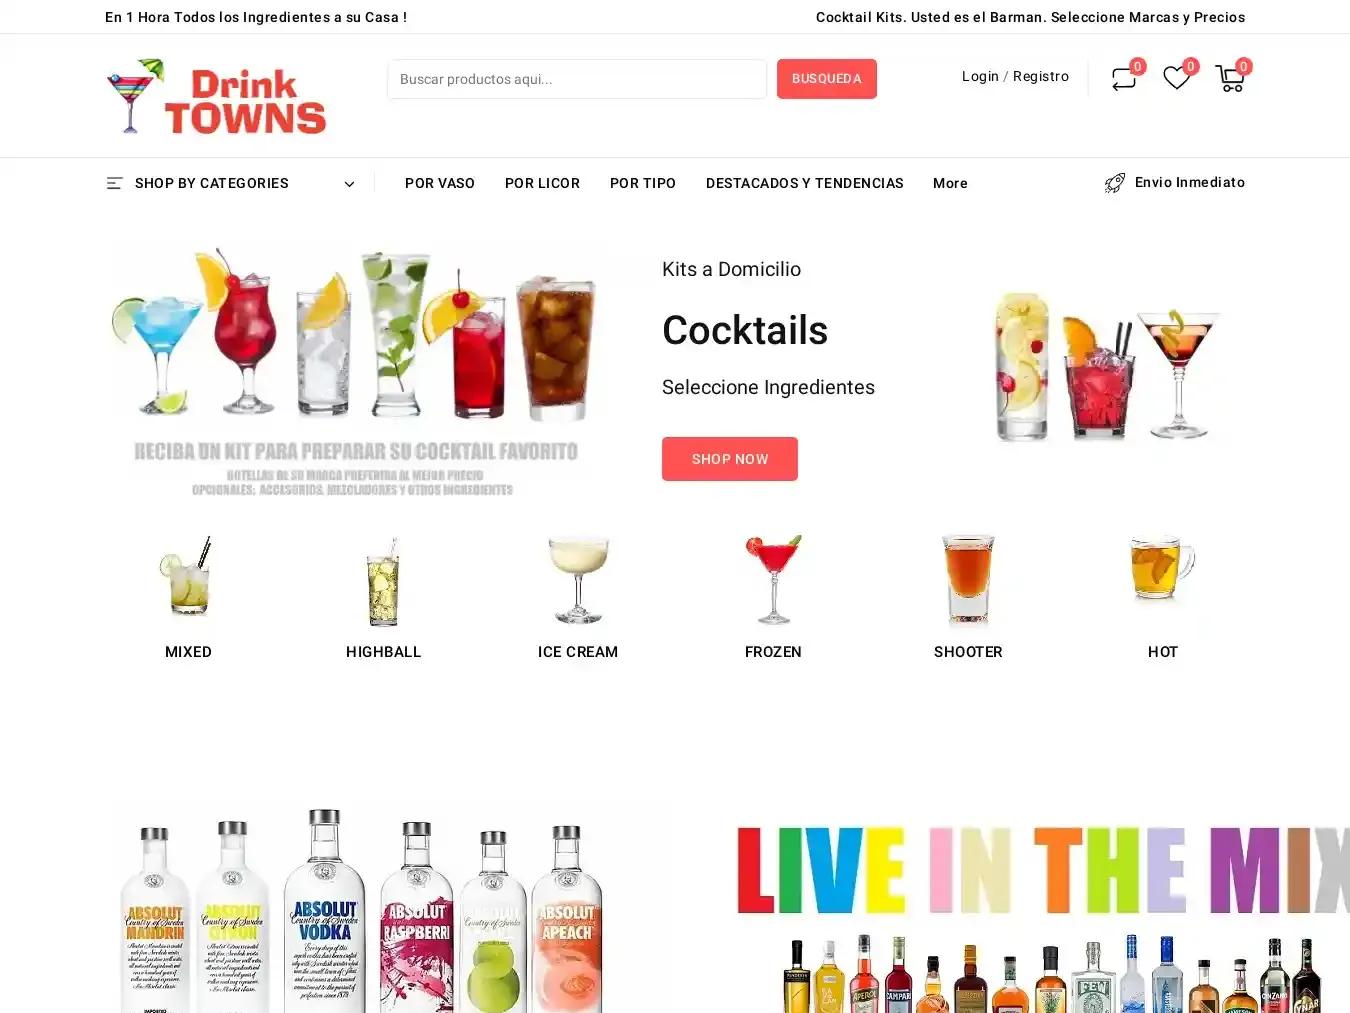 Drinktowns.com Fraudulent Non-Delivery website.